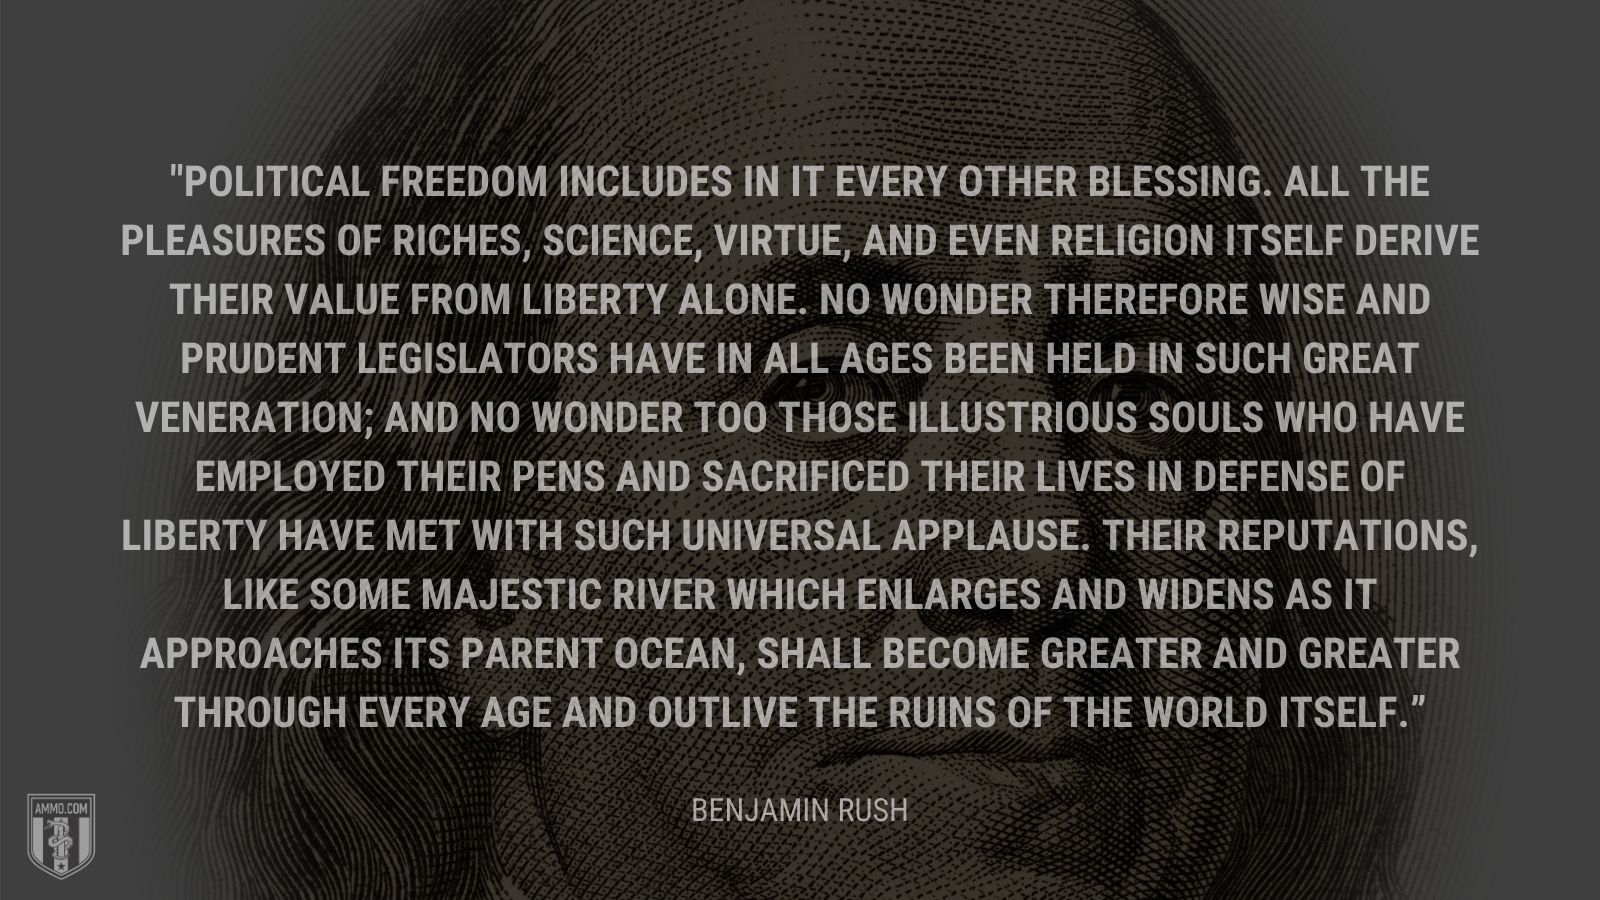 “Political freedom includes in it every other blessing. All the pleasures of riches, science, virtue, and even religion itself derive their value from liberty alone. No wonder therefore wise and prudent legislators have in all ages been held in such great veneration; and no wonder too those illustrious souls who have employed their pens and sacrificed their lives in defense of liberty have met with such universal applause. Their reputations, like some majestic river which enlarges and widens as it approaches its parent ocean, shall become greater and greater through every age and outlive the ruins of the world itself.” - Benjamin Rush